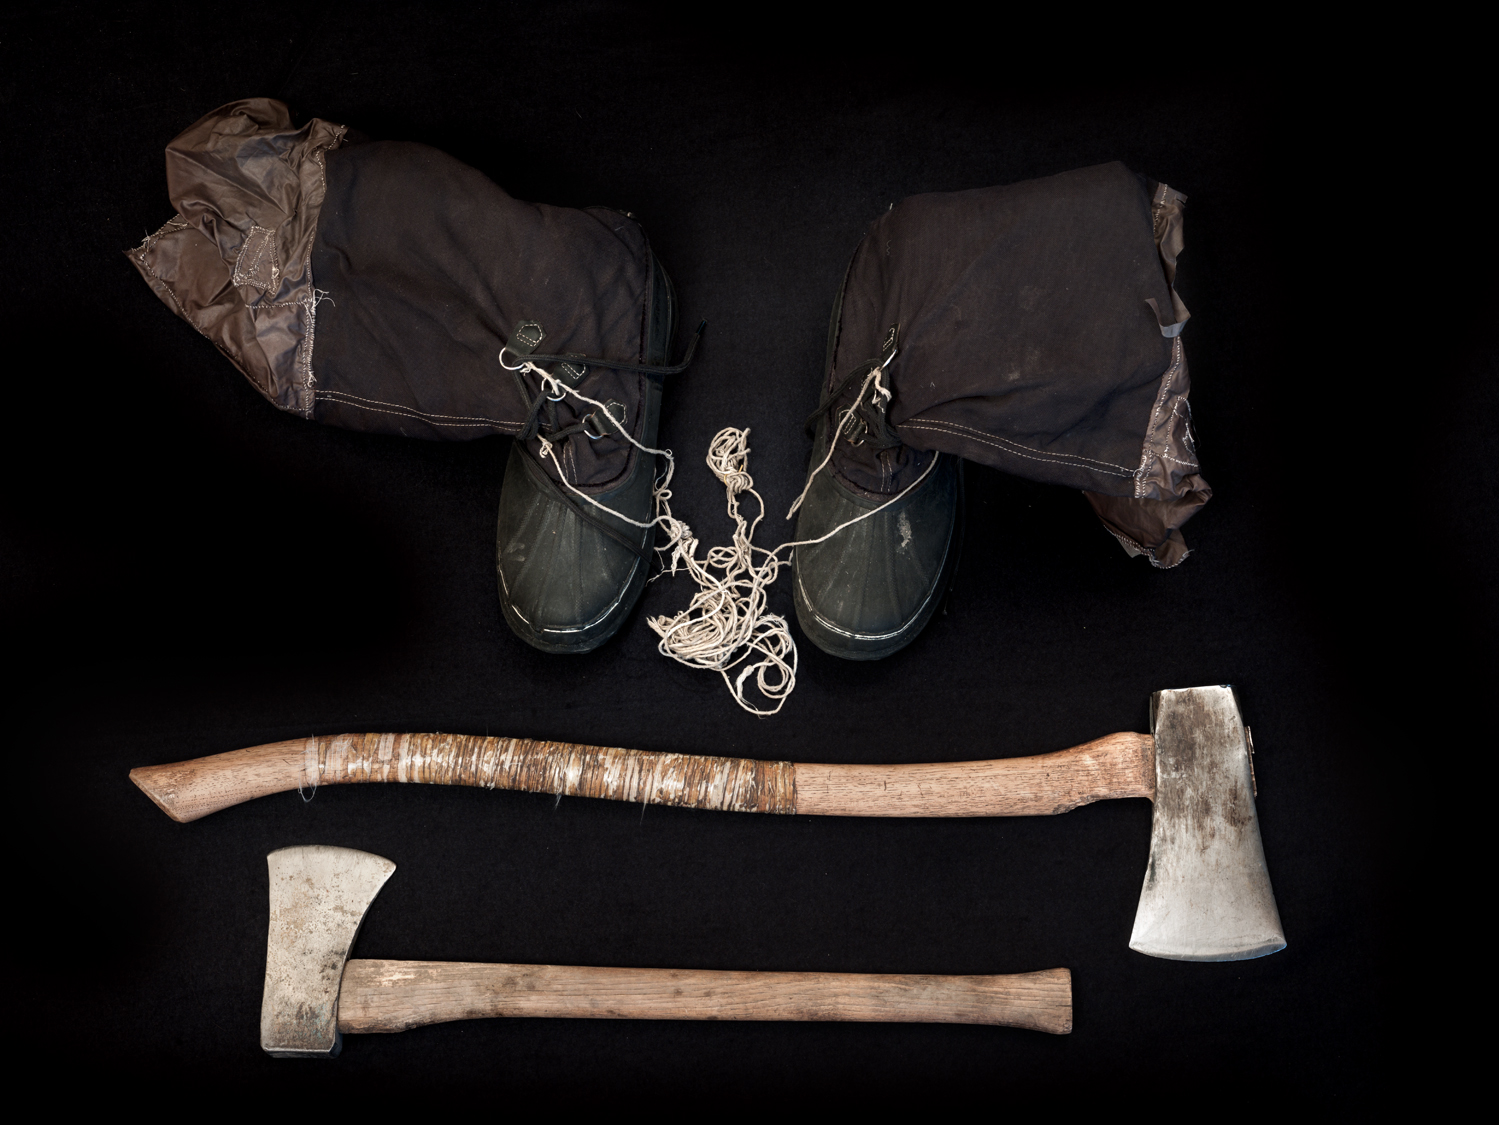  Unabomber Boots and Axes, 2015 